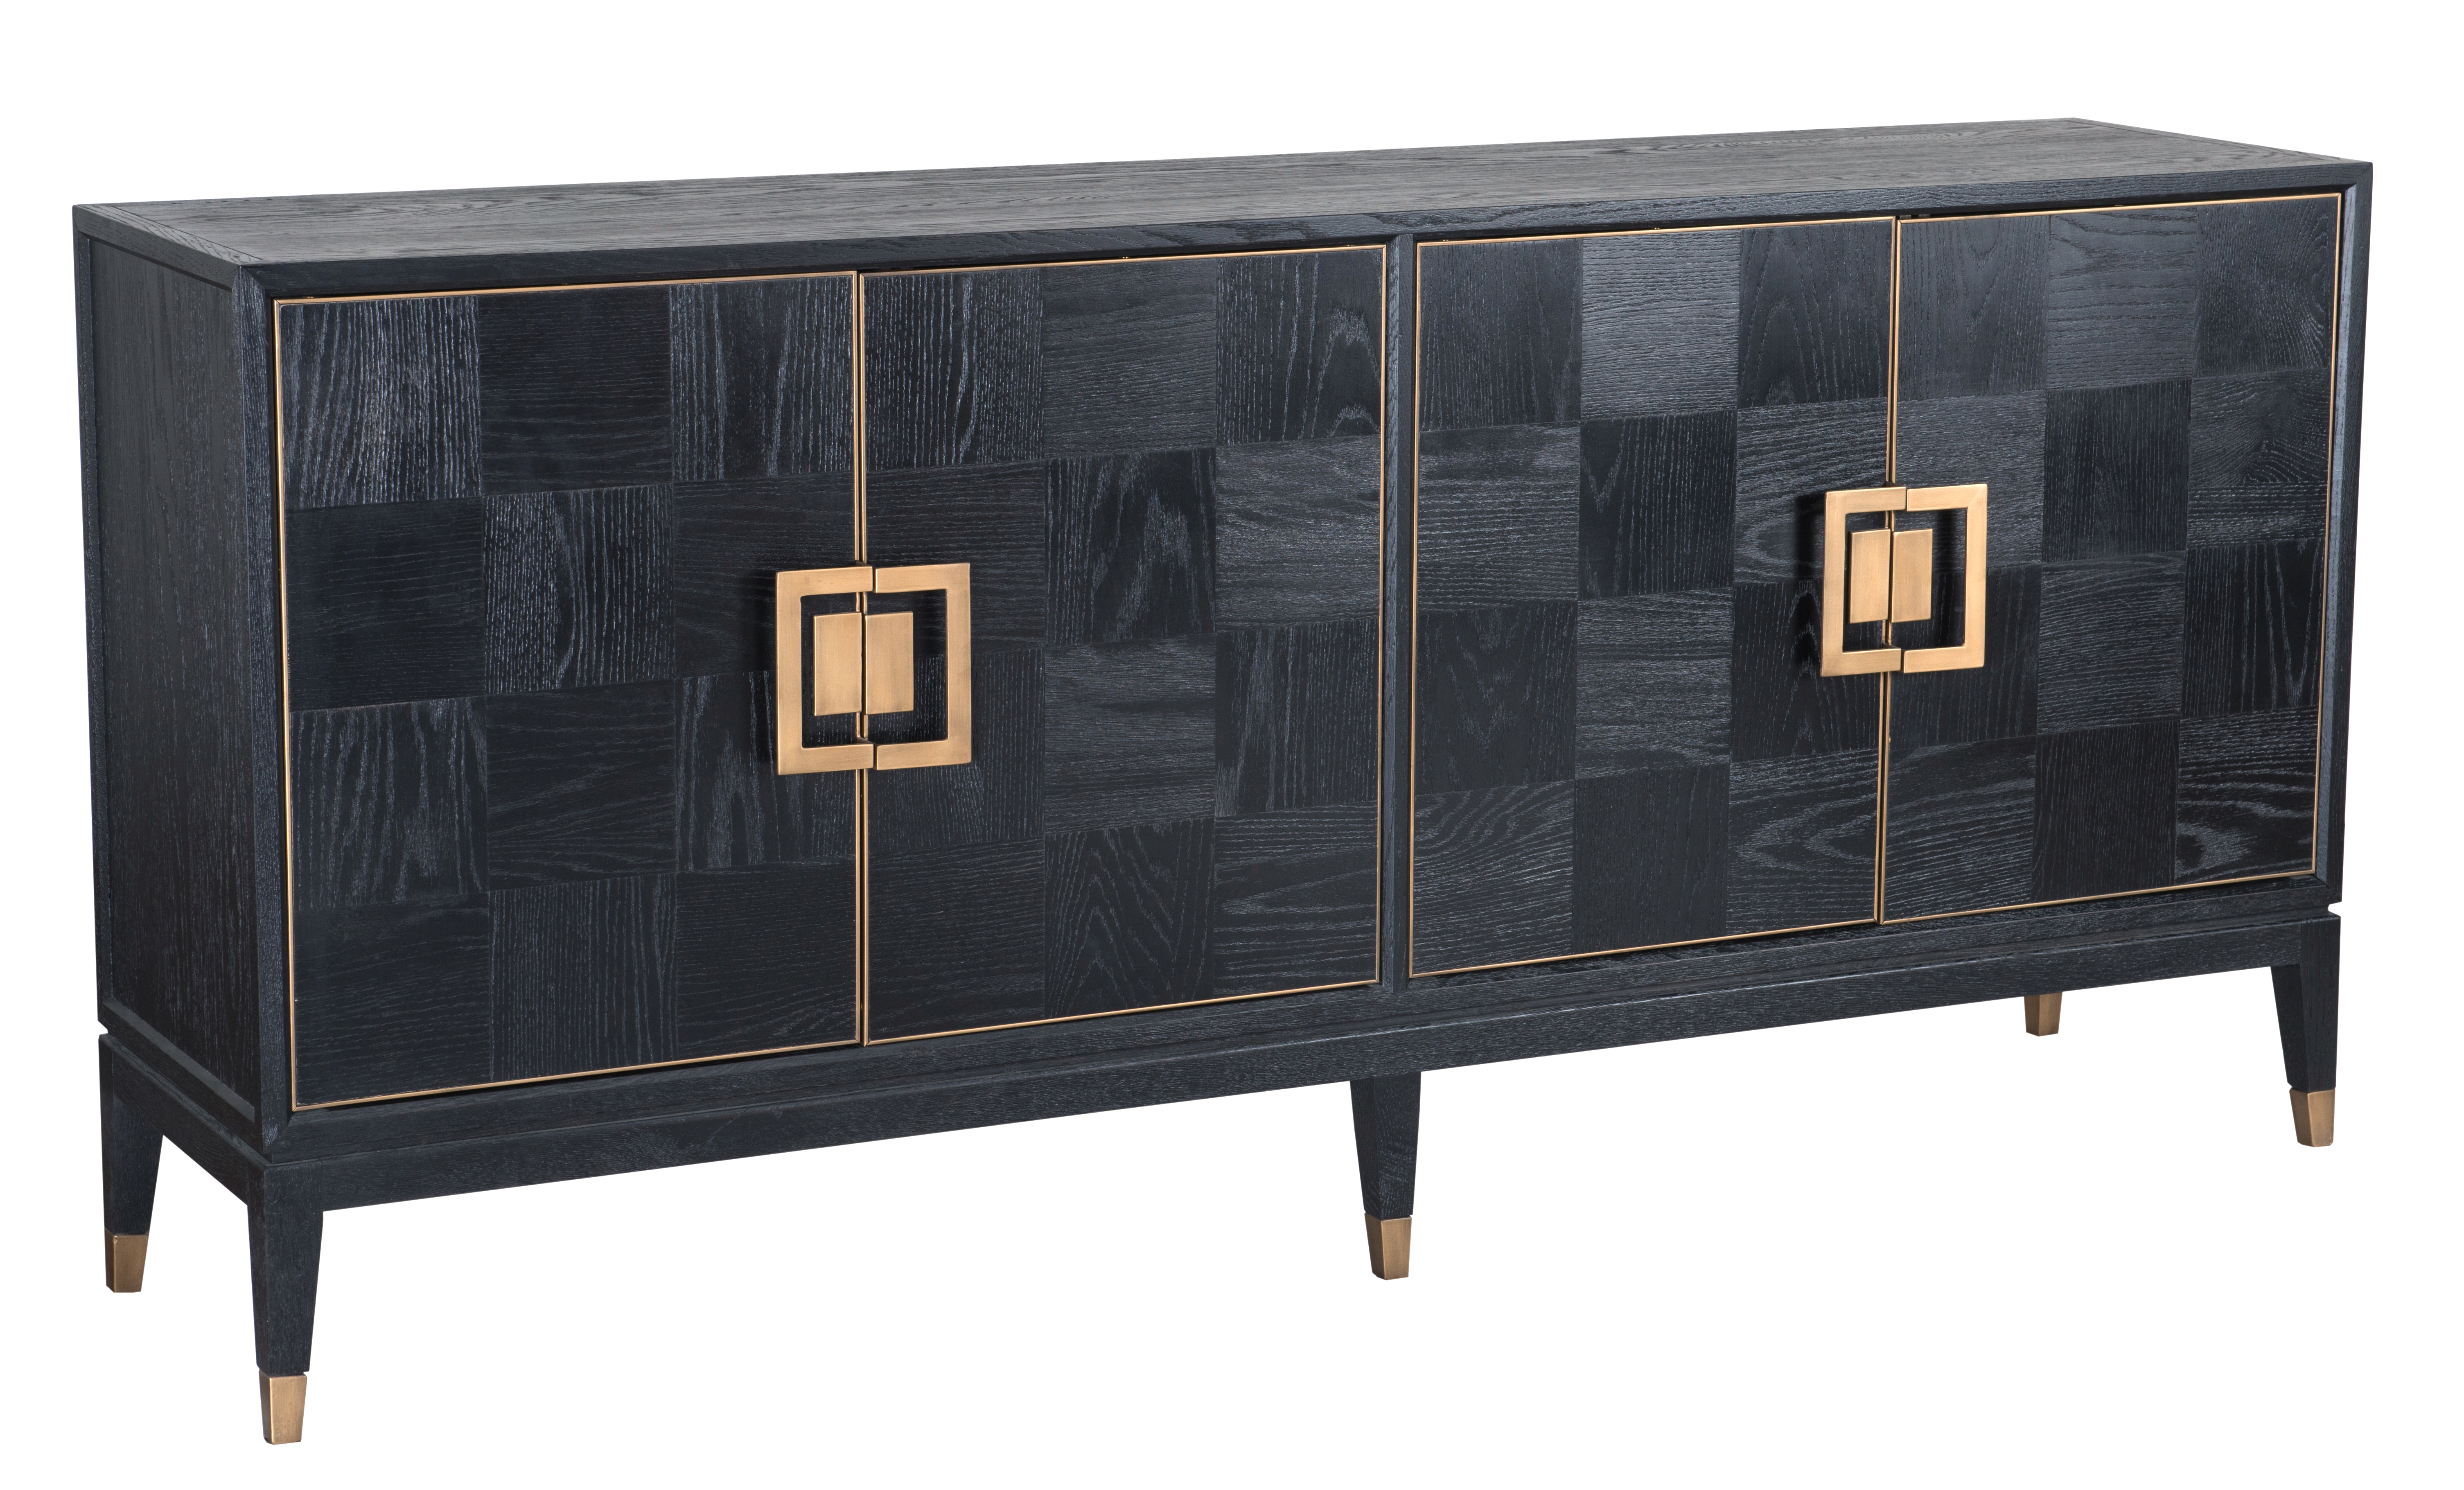 Truman sideboard in black with gold hardware from Classic Home